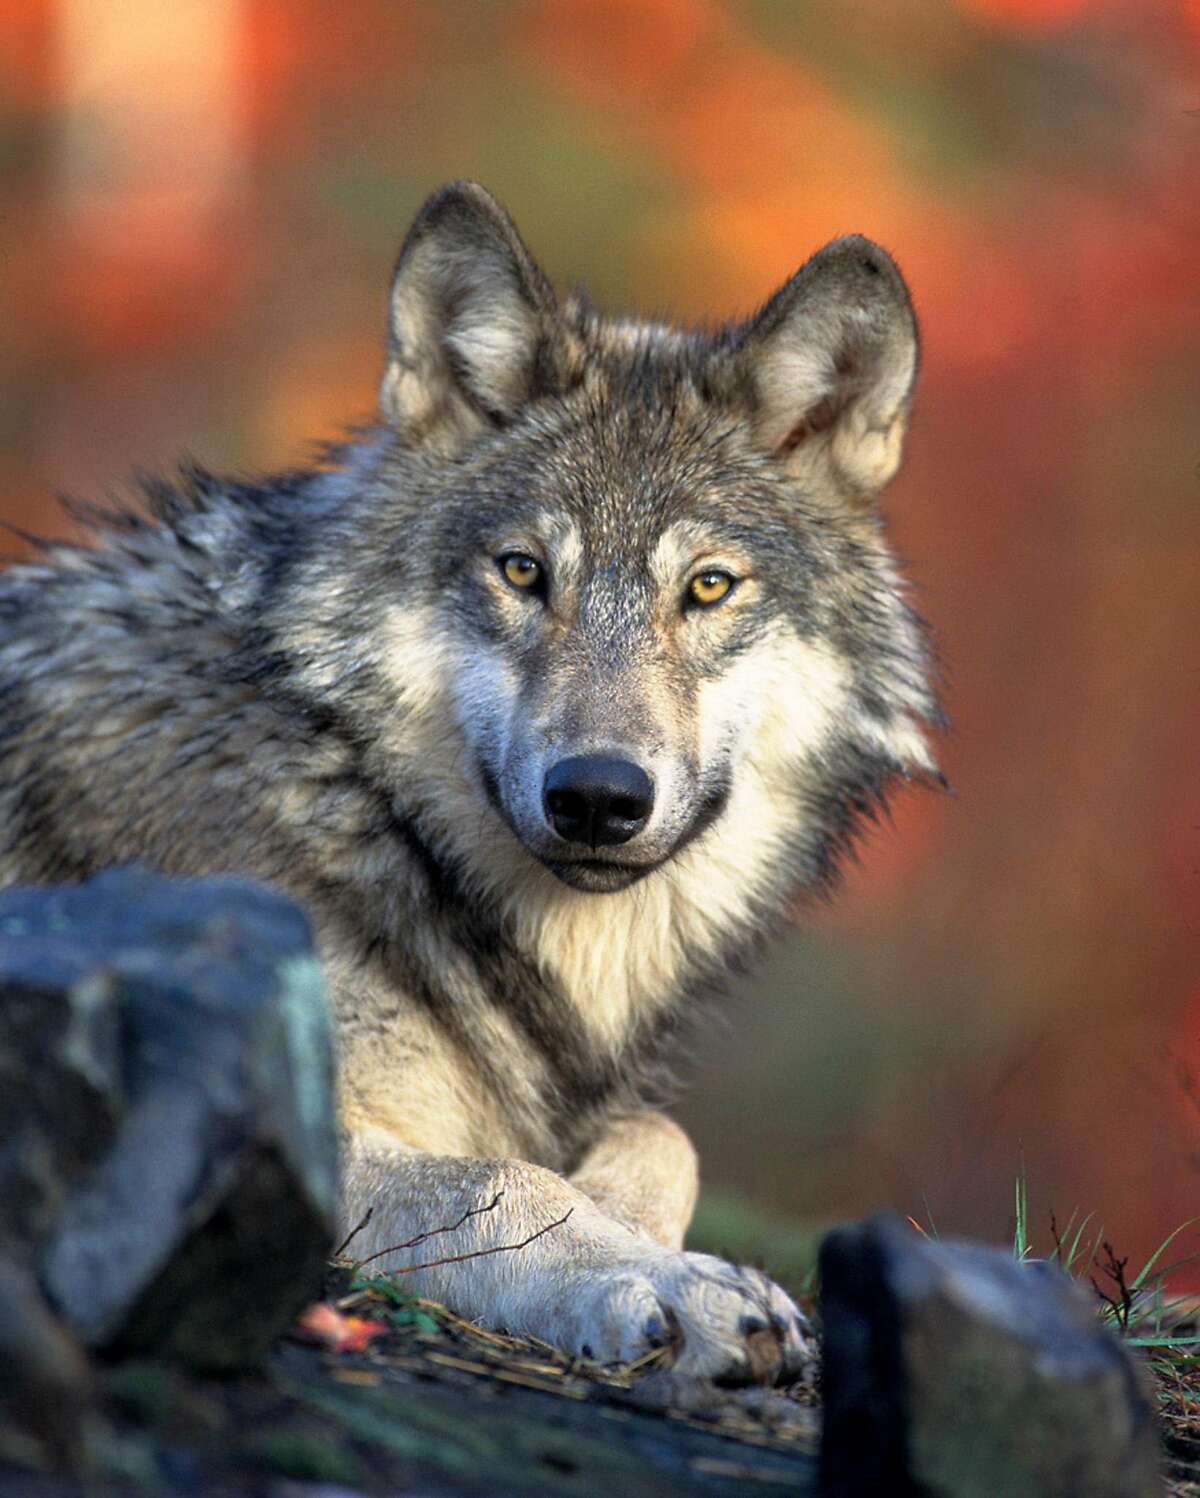 States will now be allowed to reclassify gray wolves as game or permit kills to protect livestock.